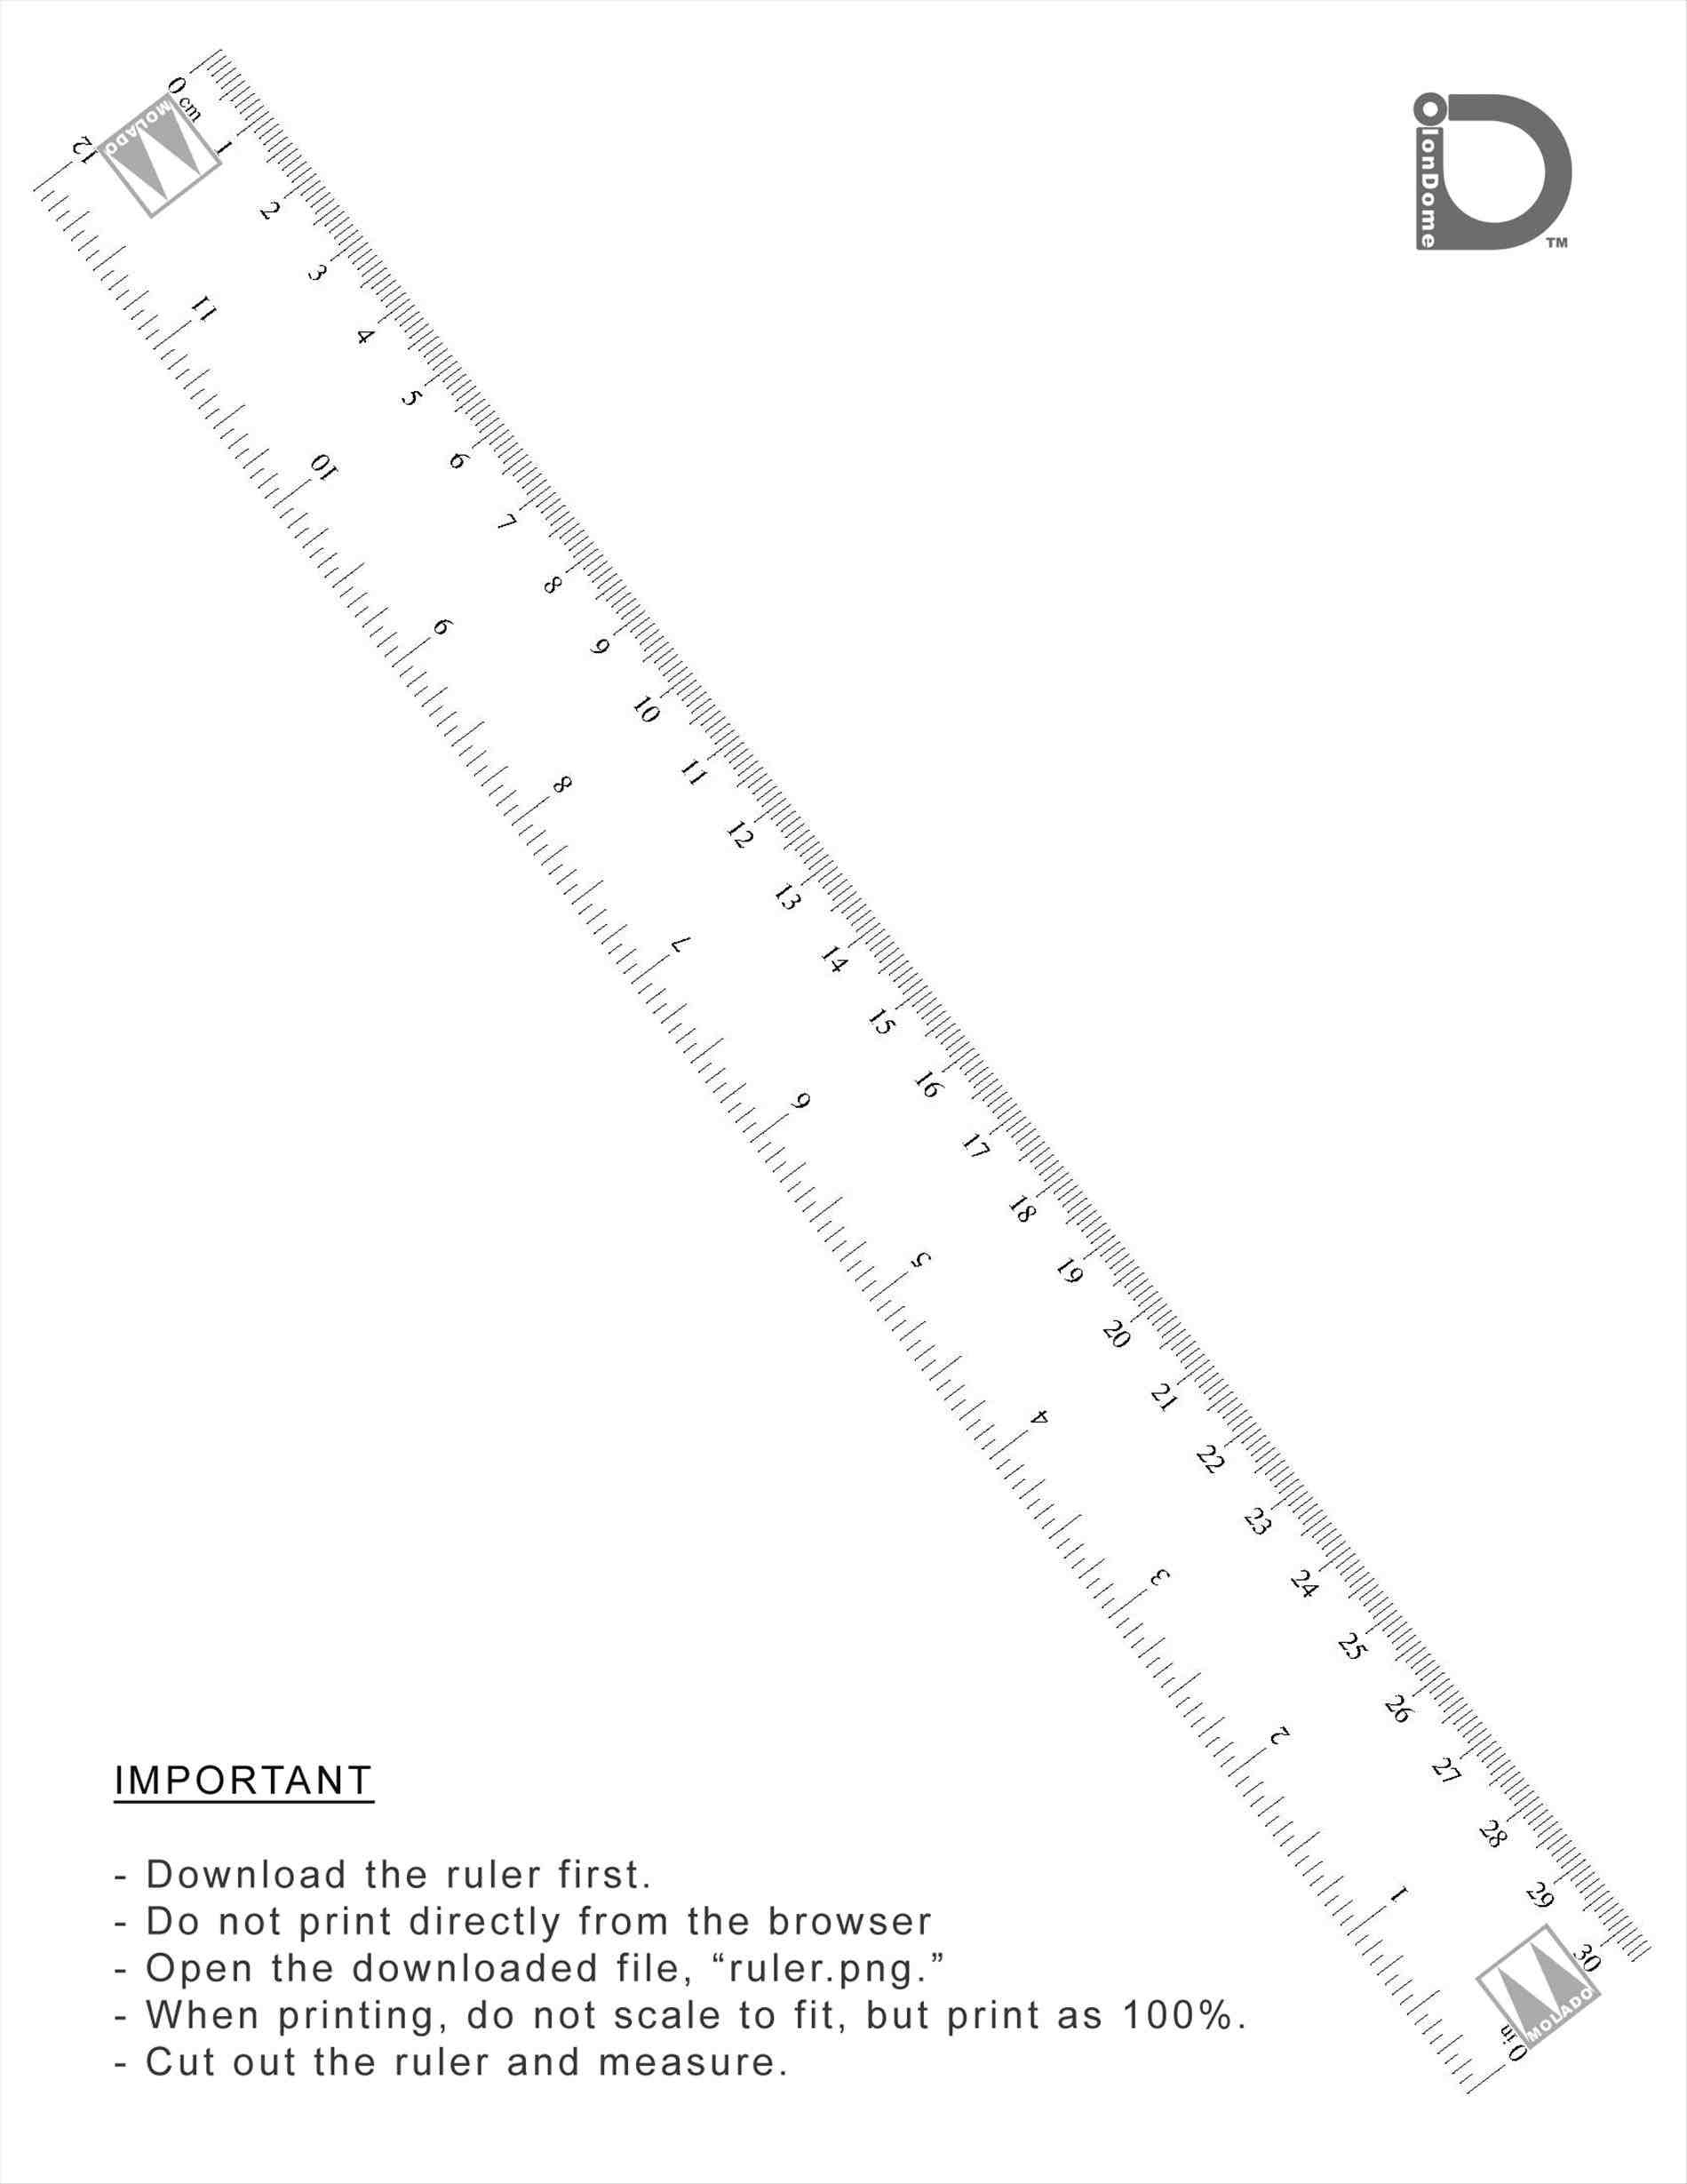 69 Free Printable Rulers | Kittybabylove - Free Printable Ruler